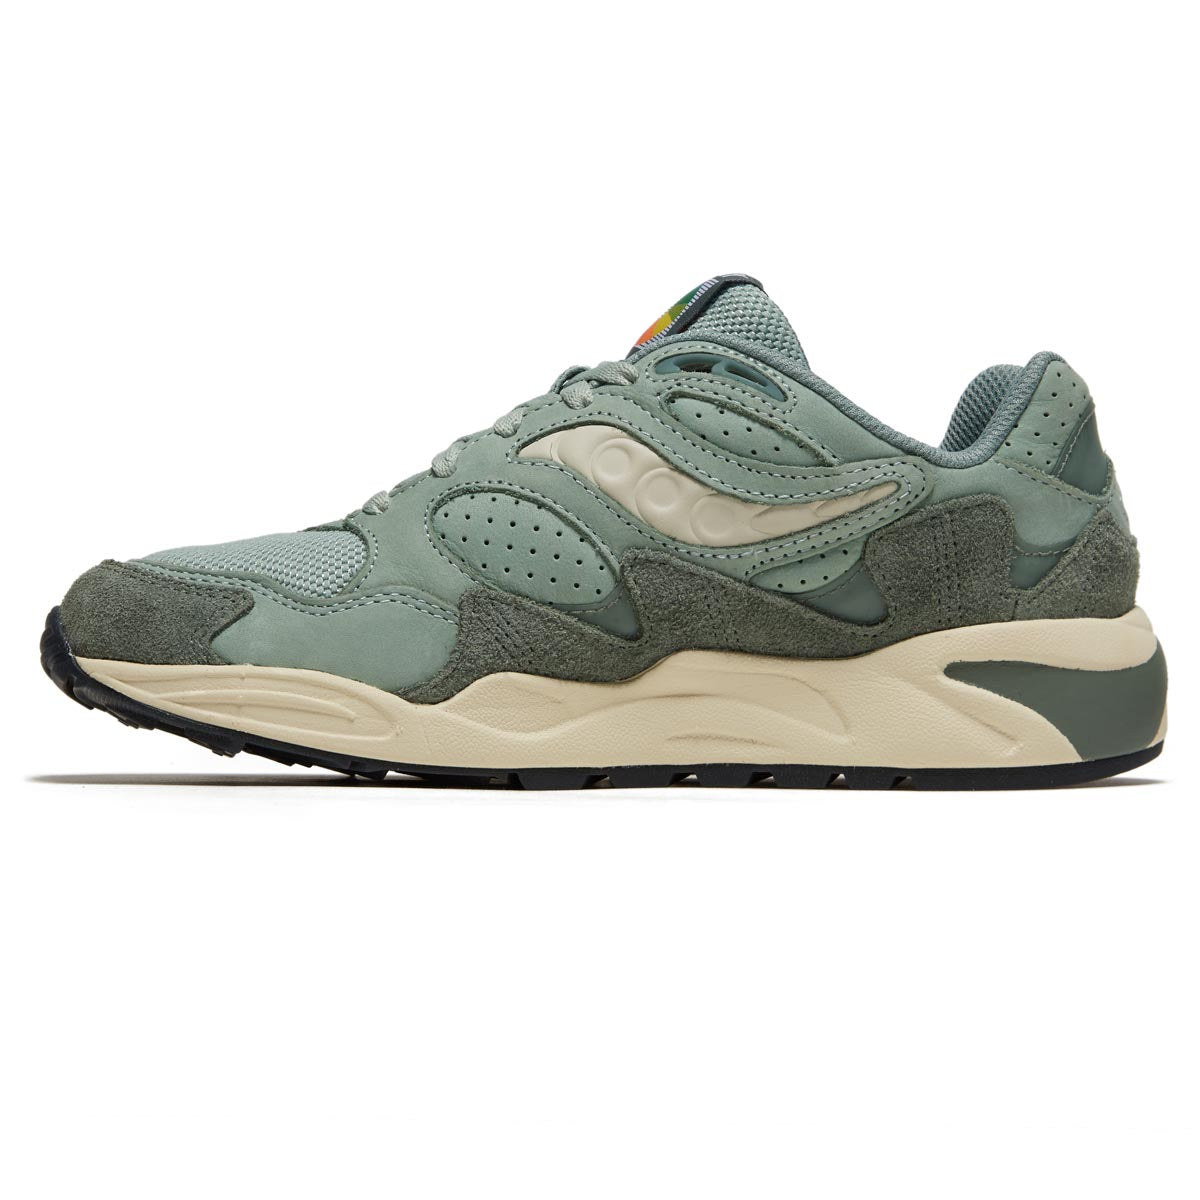 Saucony Grid Shadow 2 Shoes - Sage image 2